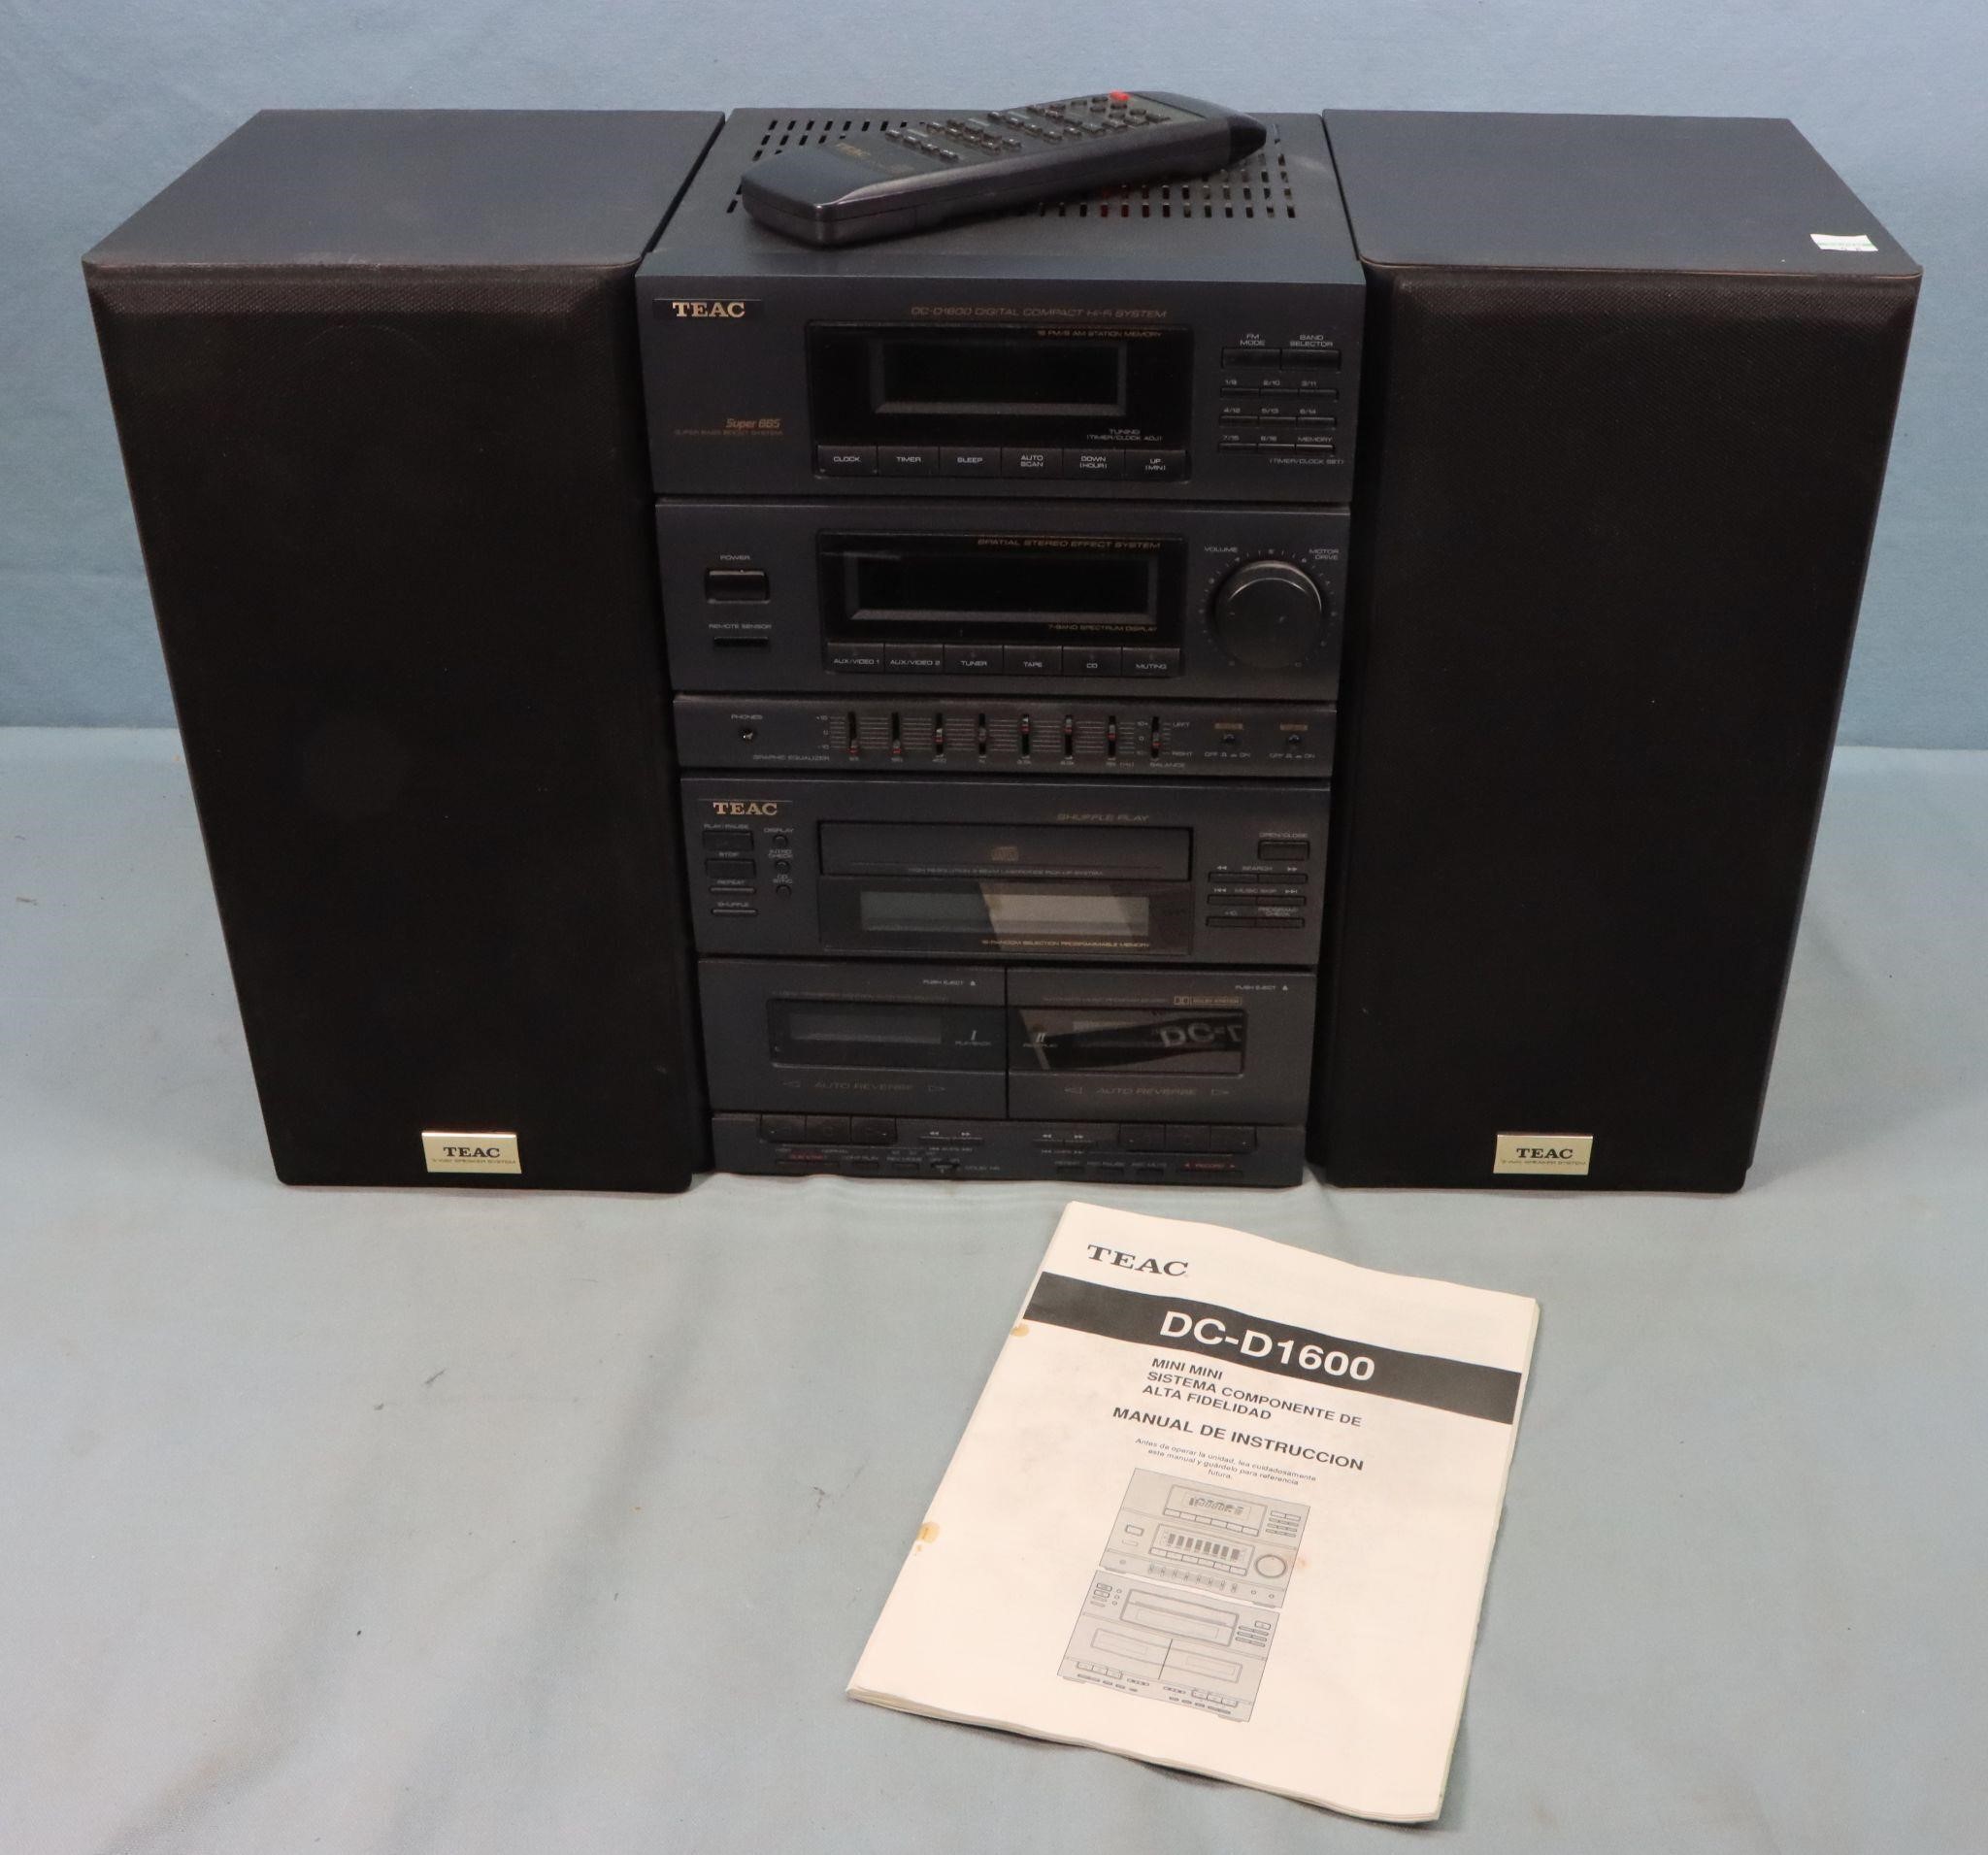 Teac DC-D1600 Compact System w/ Speakers